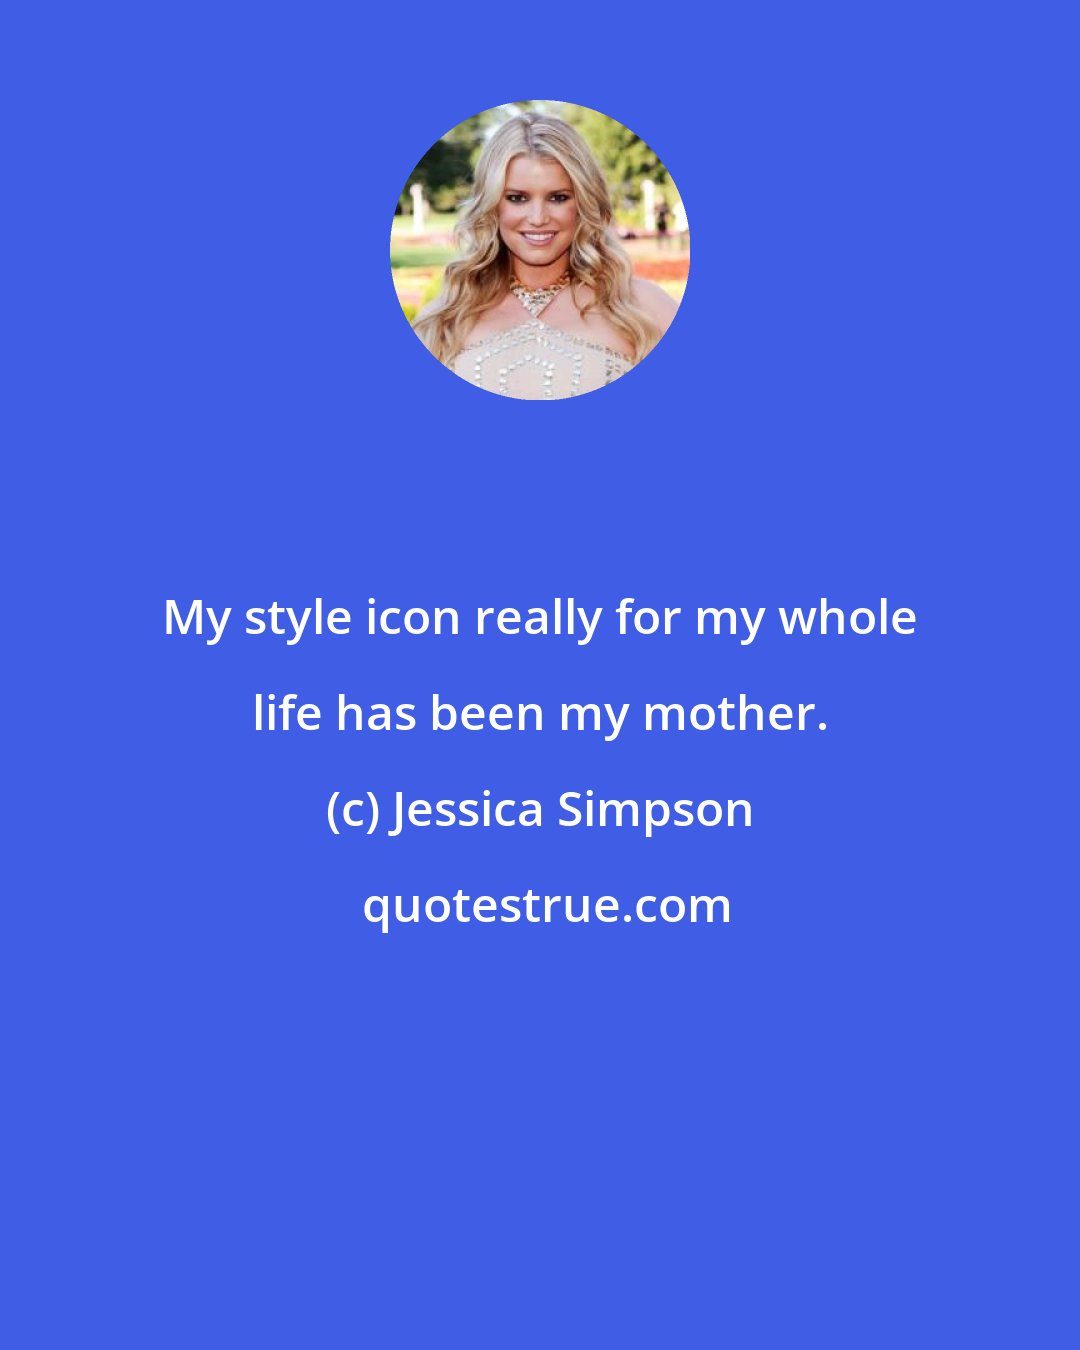 Jessica Simpson: My style icon really for my whole life has been my mother.